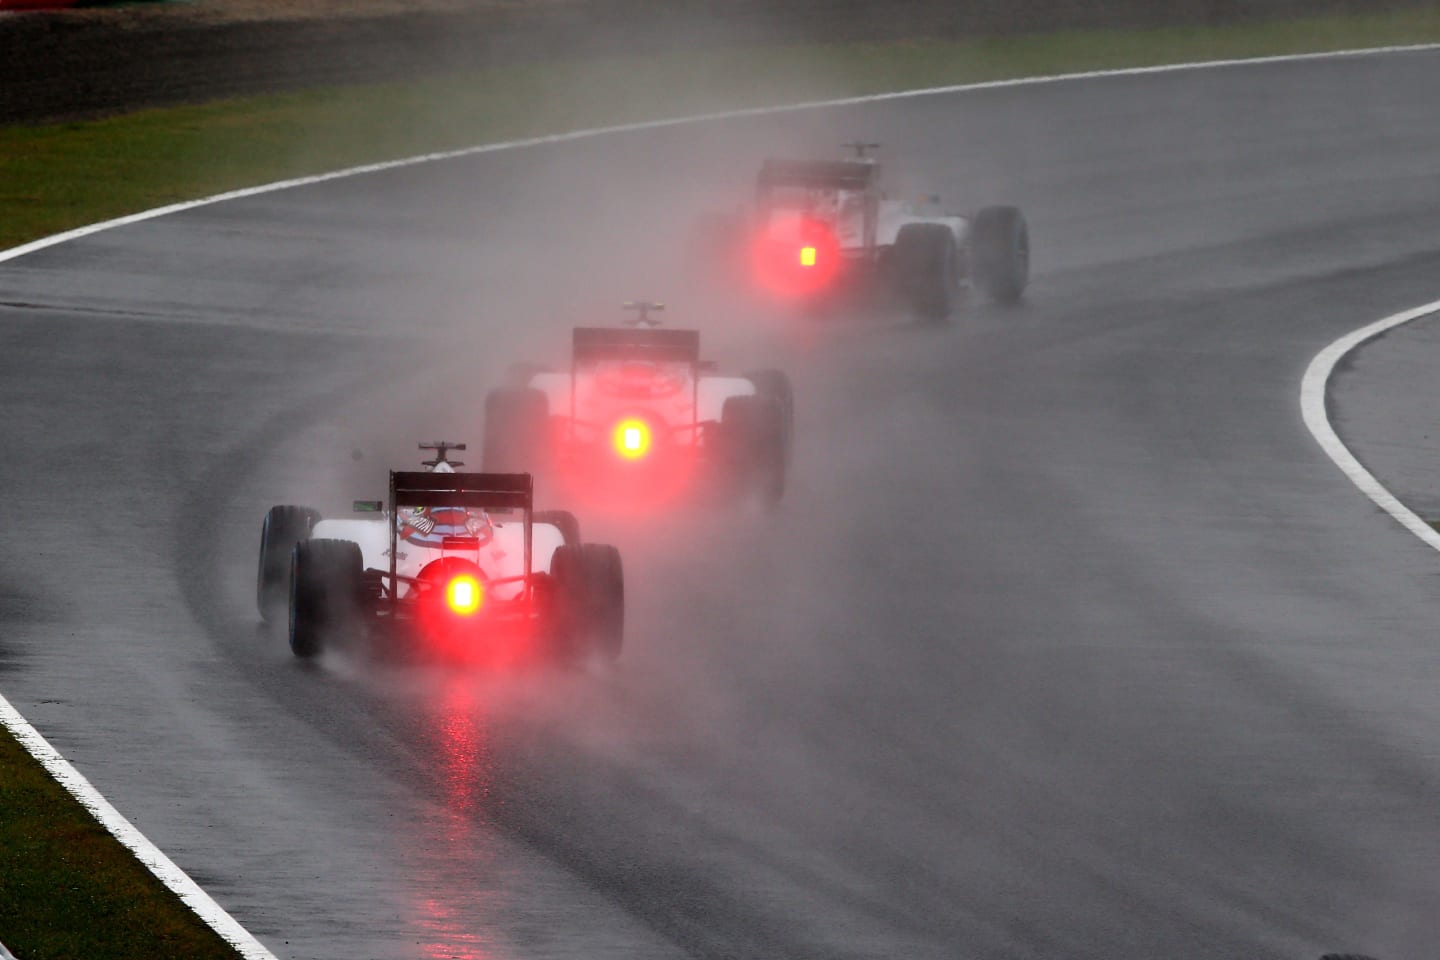 SUZUKA, JAPAN - OCTOBER 05: Drivers compete in atrocious conditions during the Japanese Formula One